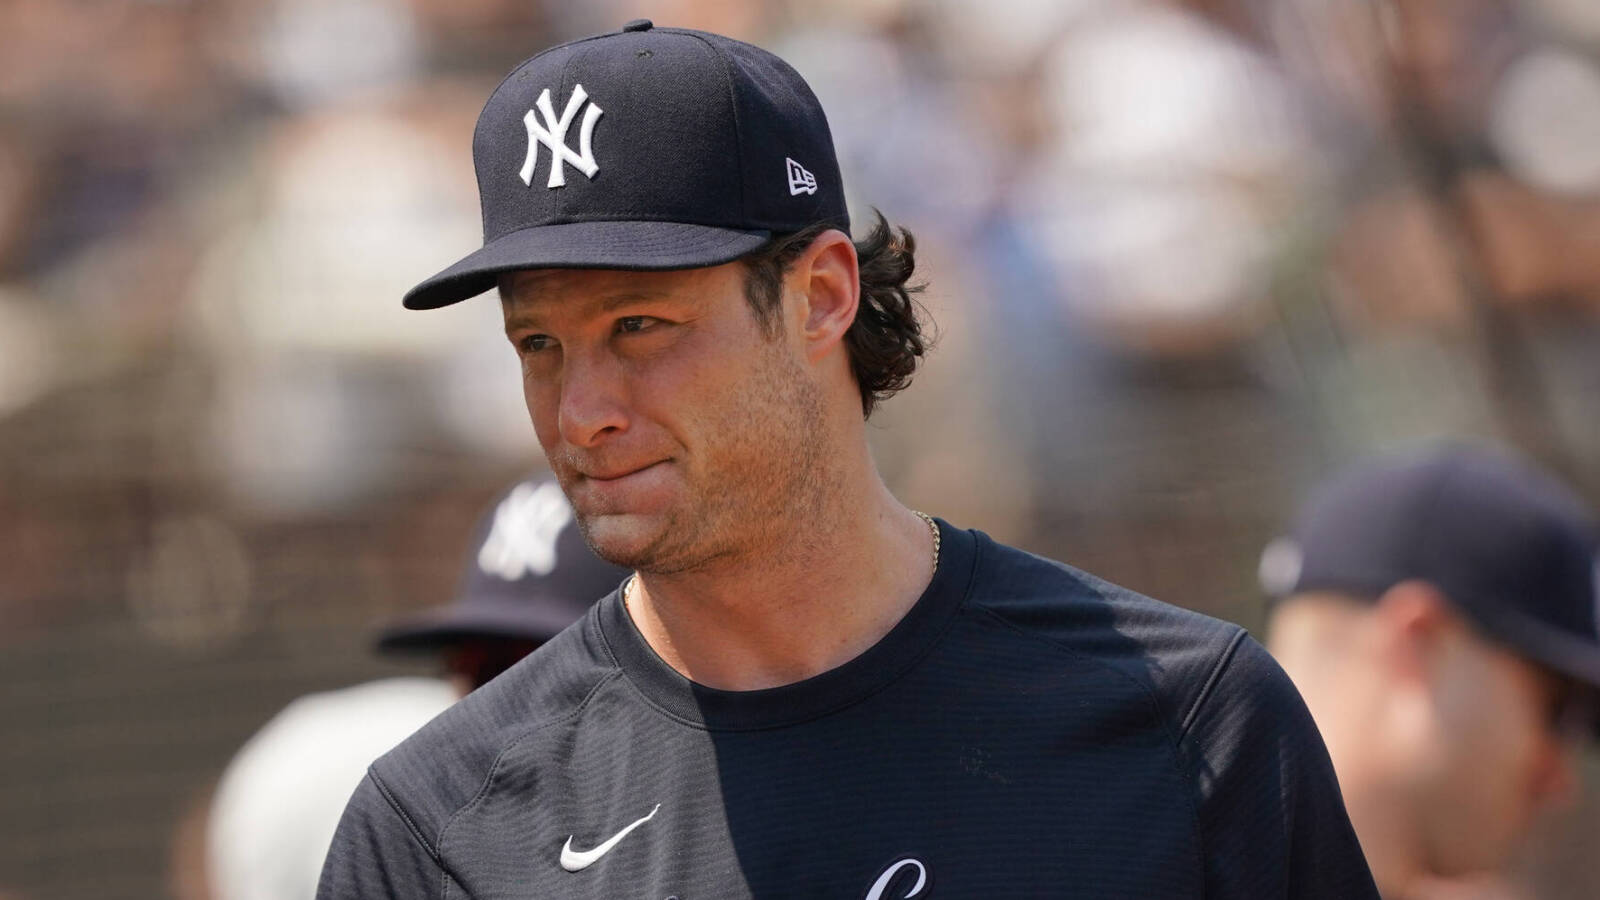 Yankees' Gerrit Cole: MLBPA 'united to protect the integrity of the game' amid MLB lockout